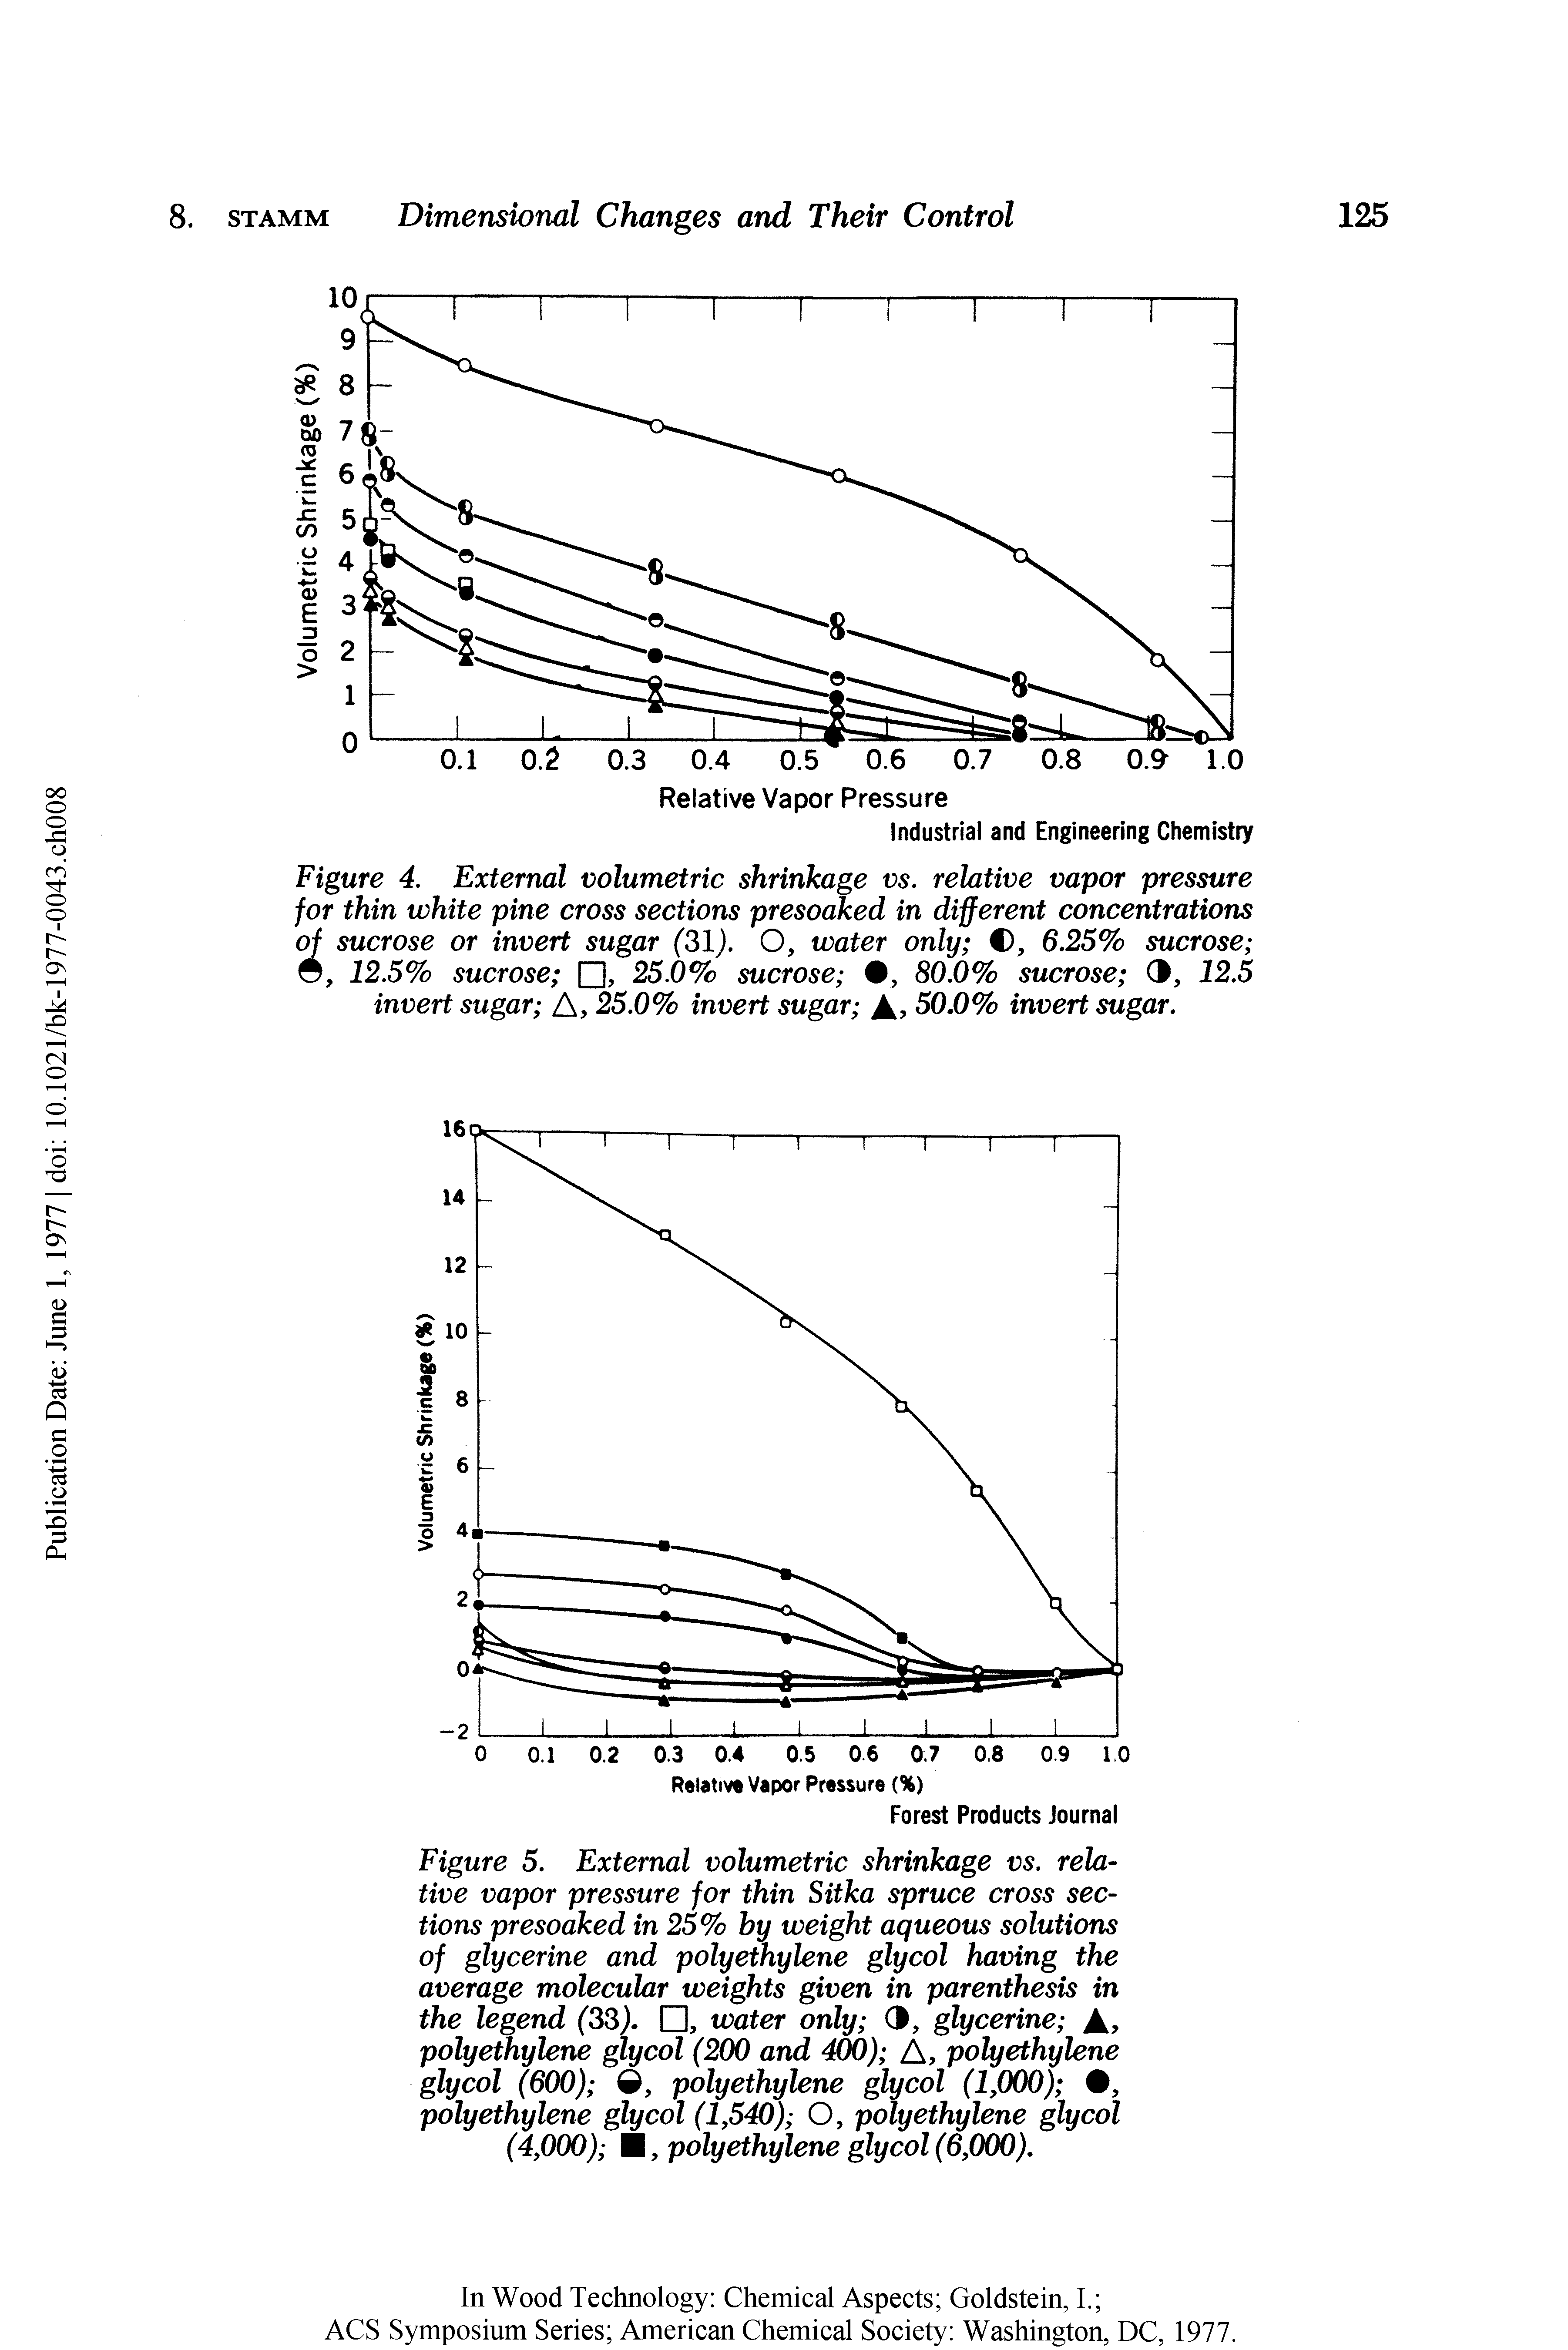 Figure 4. External volumetric shrinkage vs. relative vapor pressure for thin white pine cross sections presoaked in different concentrations of sucrose or invert sugar (31). O, water only C, 6.25% sucrose 0, 12.5% sucrose , 25.0% sucrose , 80.0% sucrose 3, 12.5 invert sugar A, 25.0% invert sugar 60.0% invert sugar.